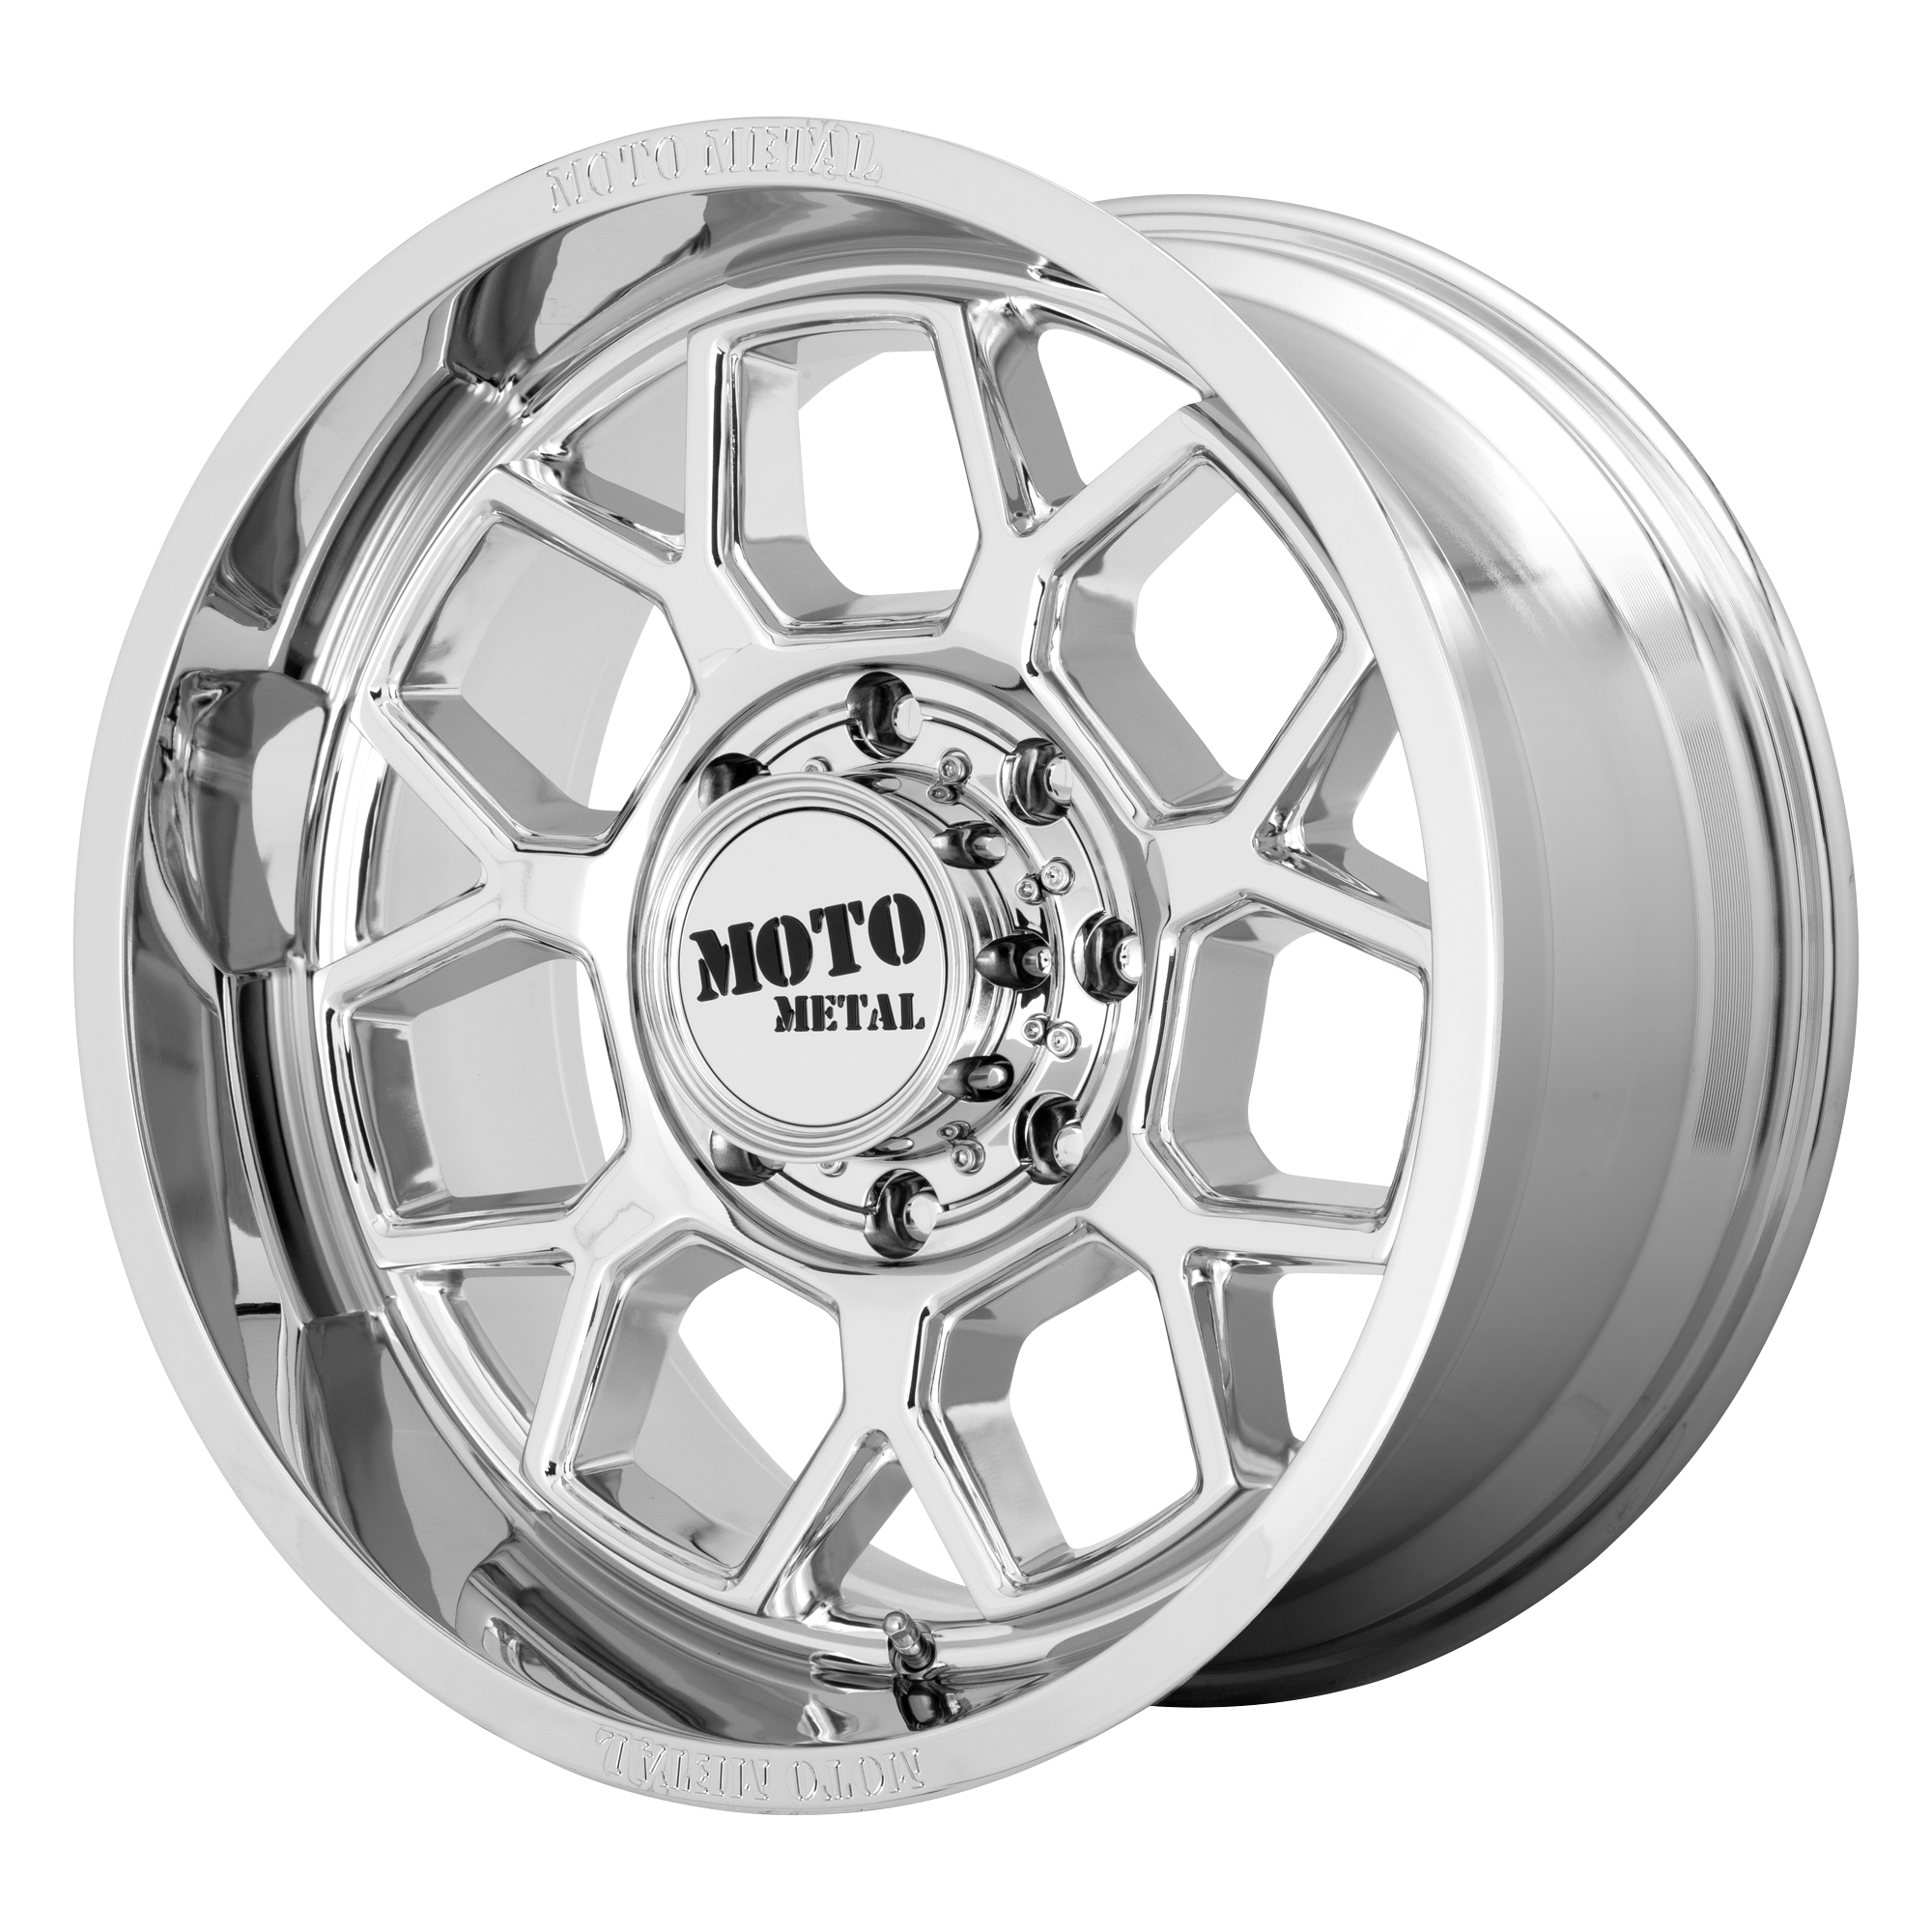 BANSHEE 20x10 5x139.70 CHROME (-18 mm) - Tires and Engine Performance